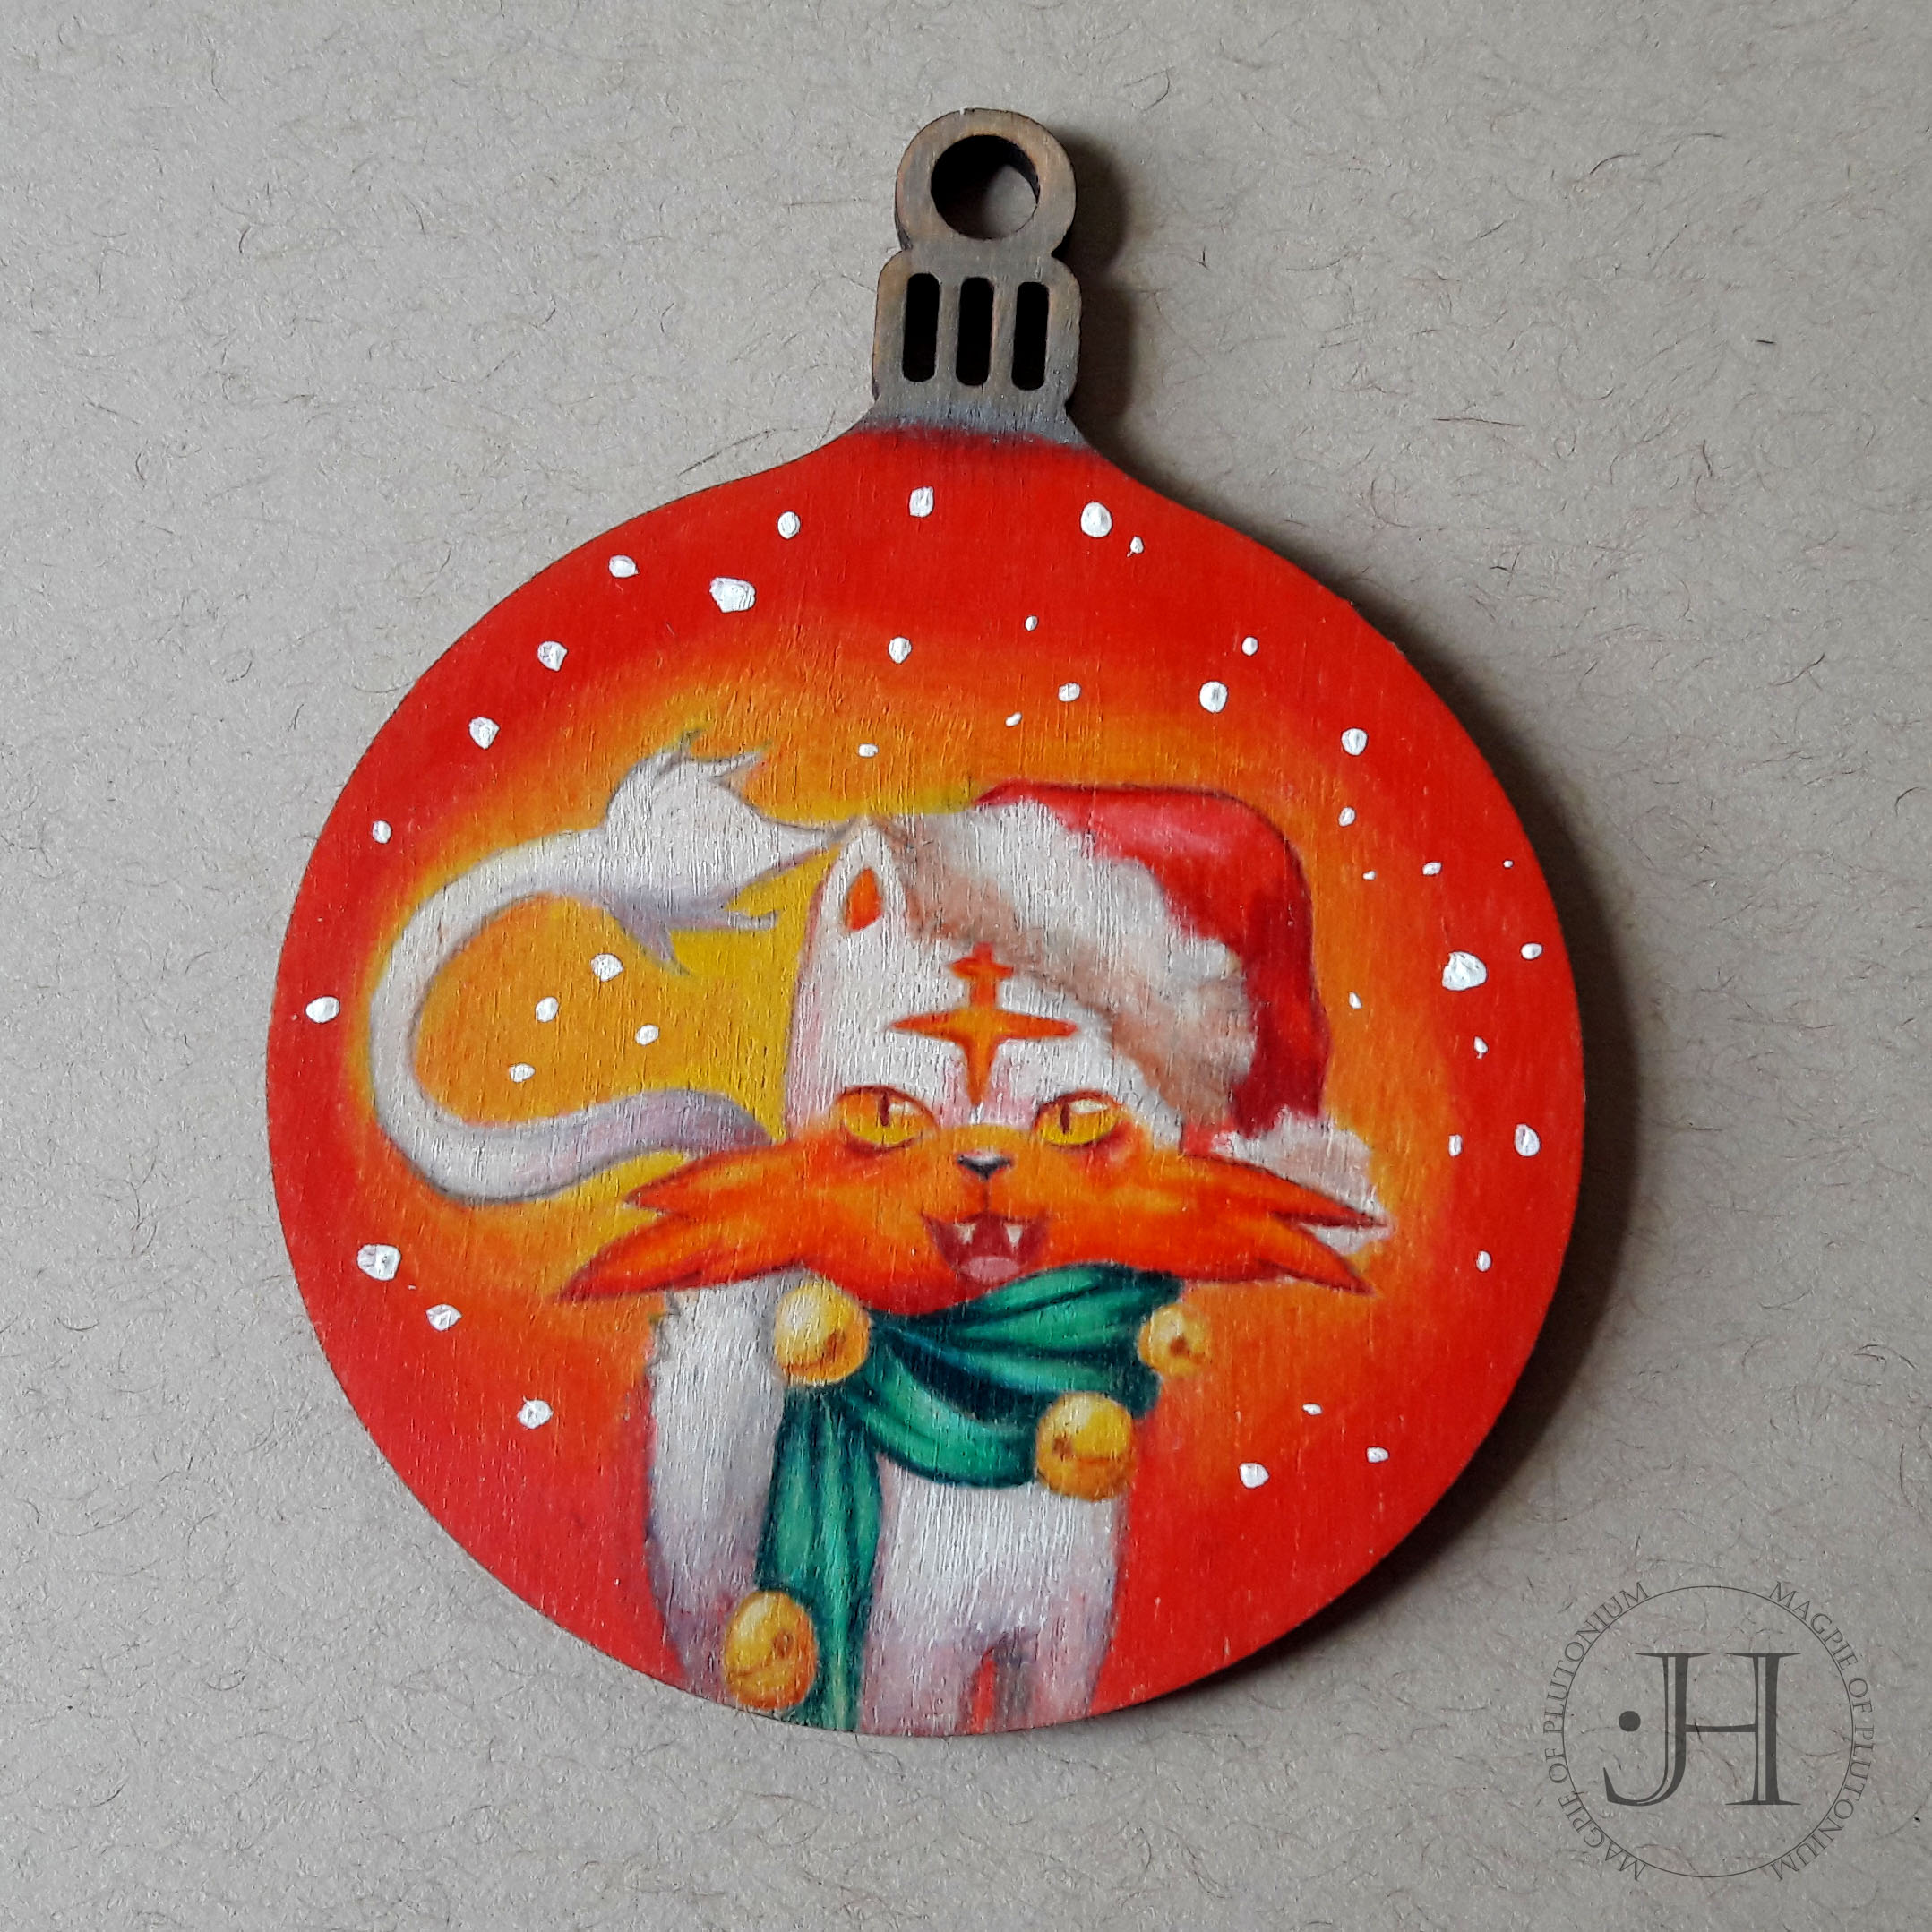 Shiny Litten Christmas Bauble by magpie-of-plutonium on DeviantArt